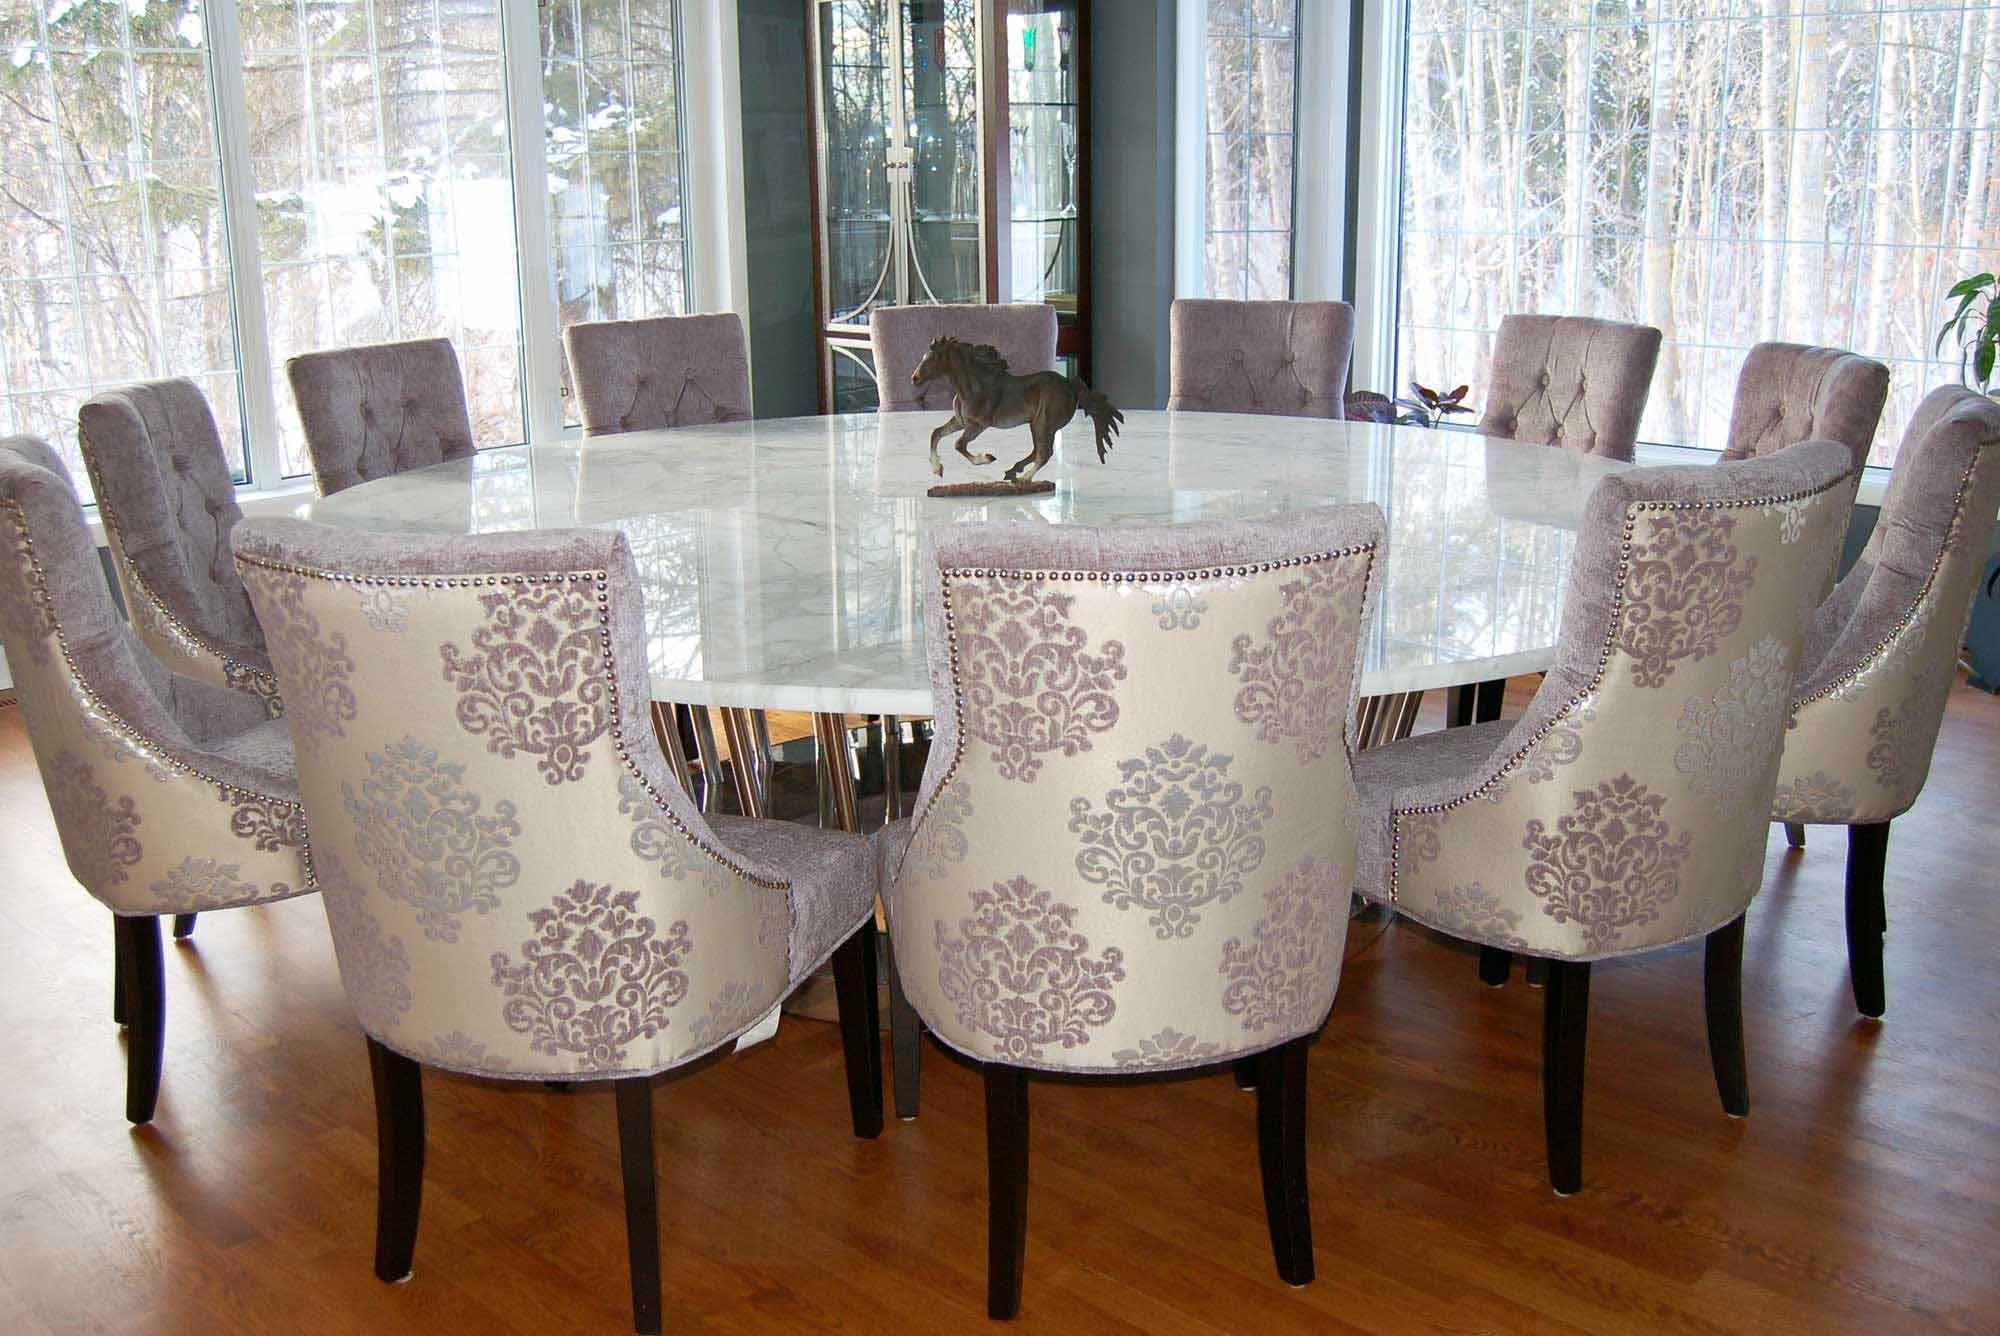 Formal Dining Room Sets Visualhunt, Large Round Formal Dining Tables